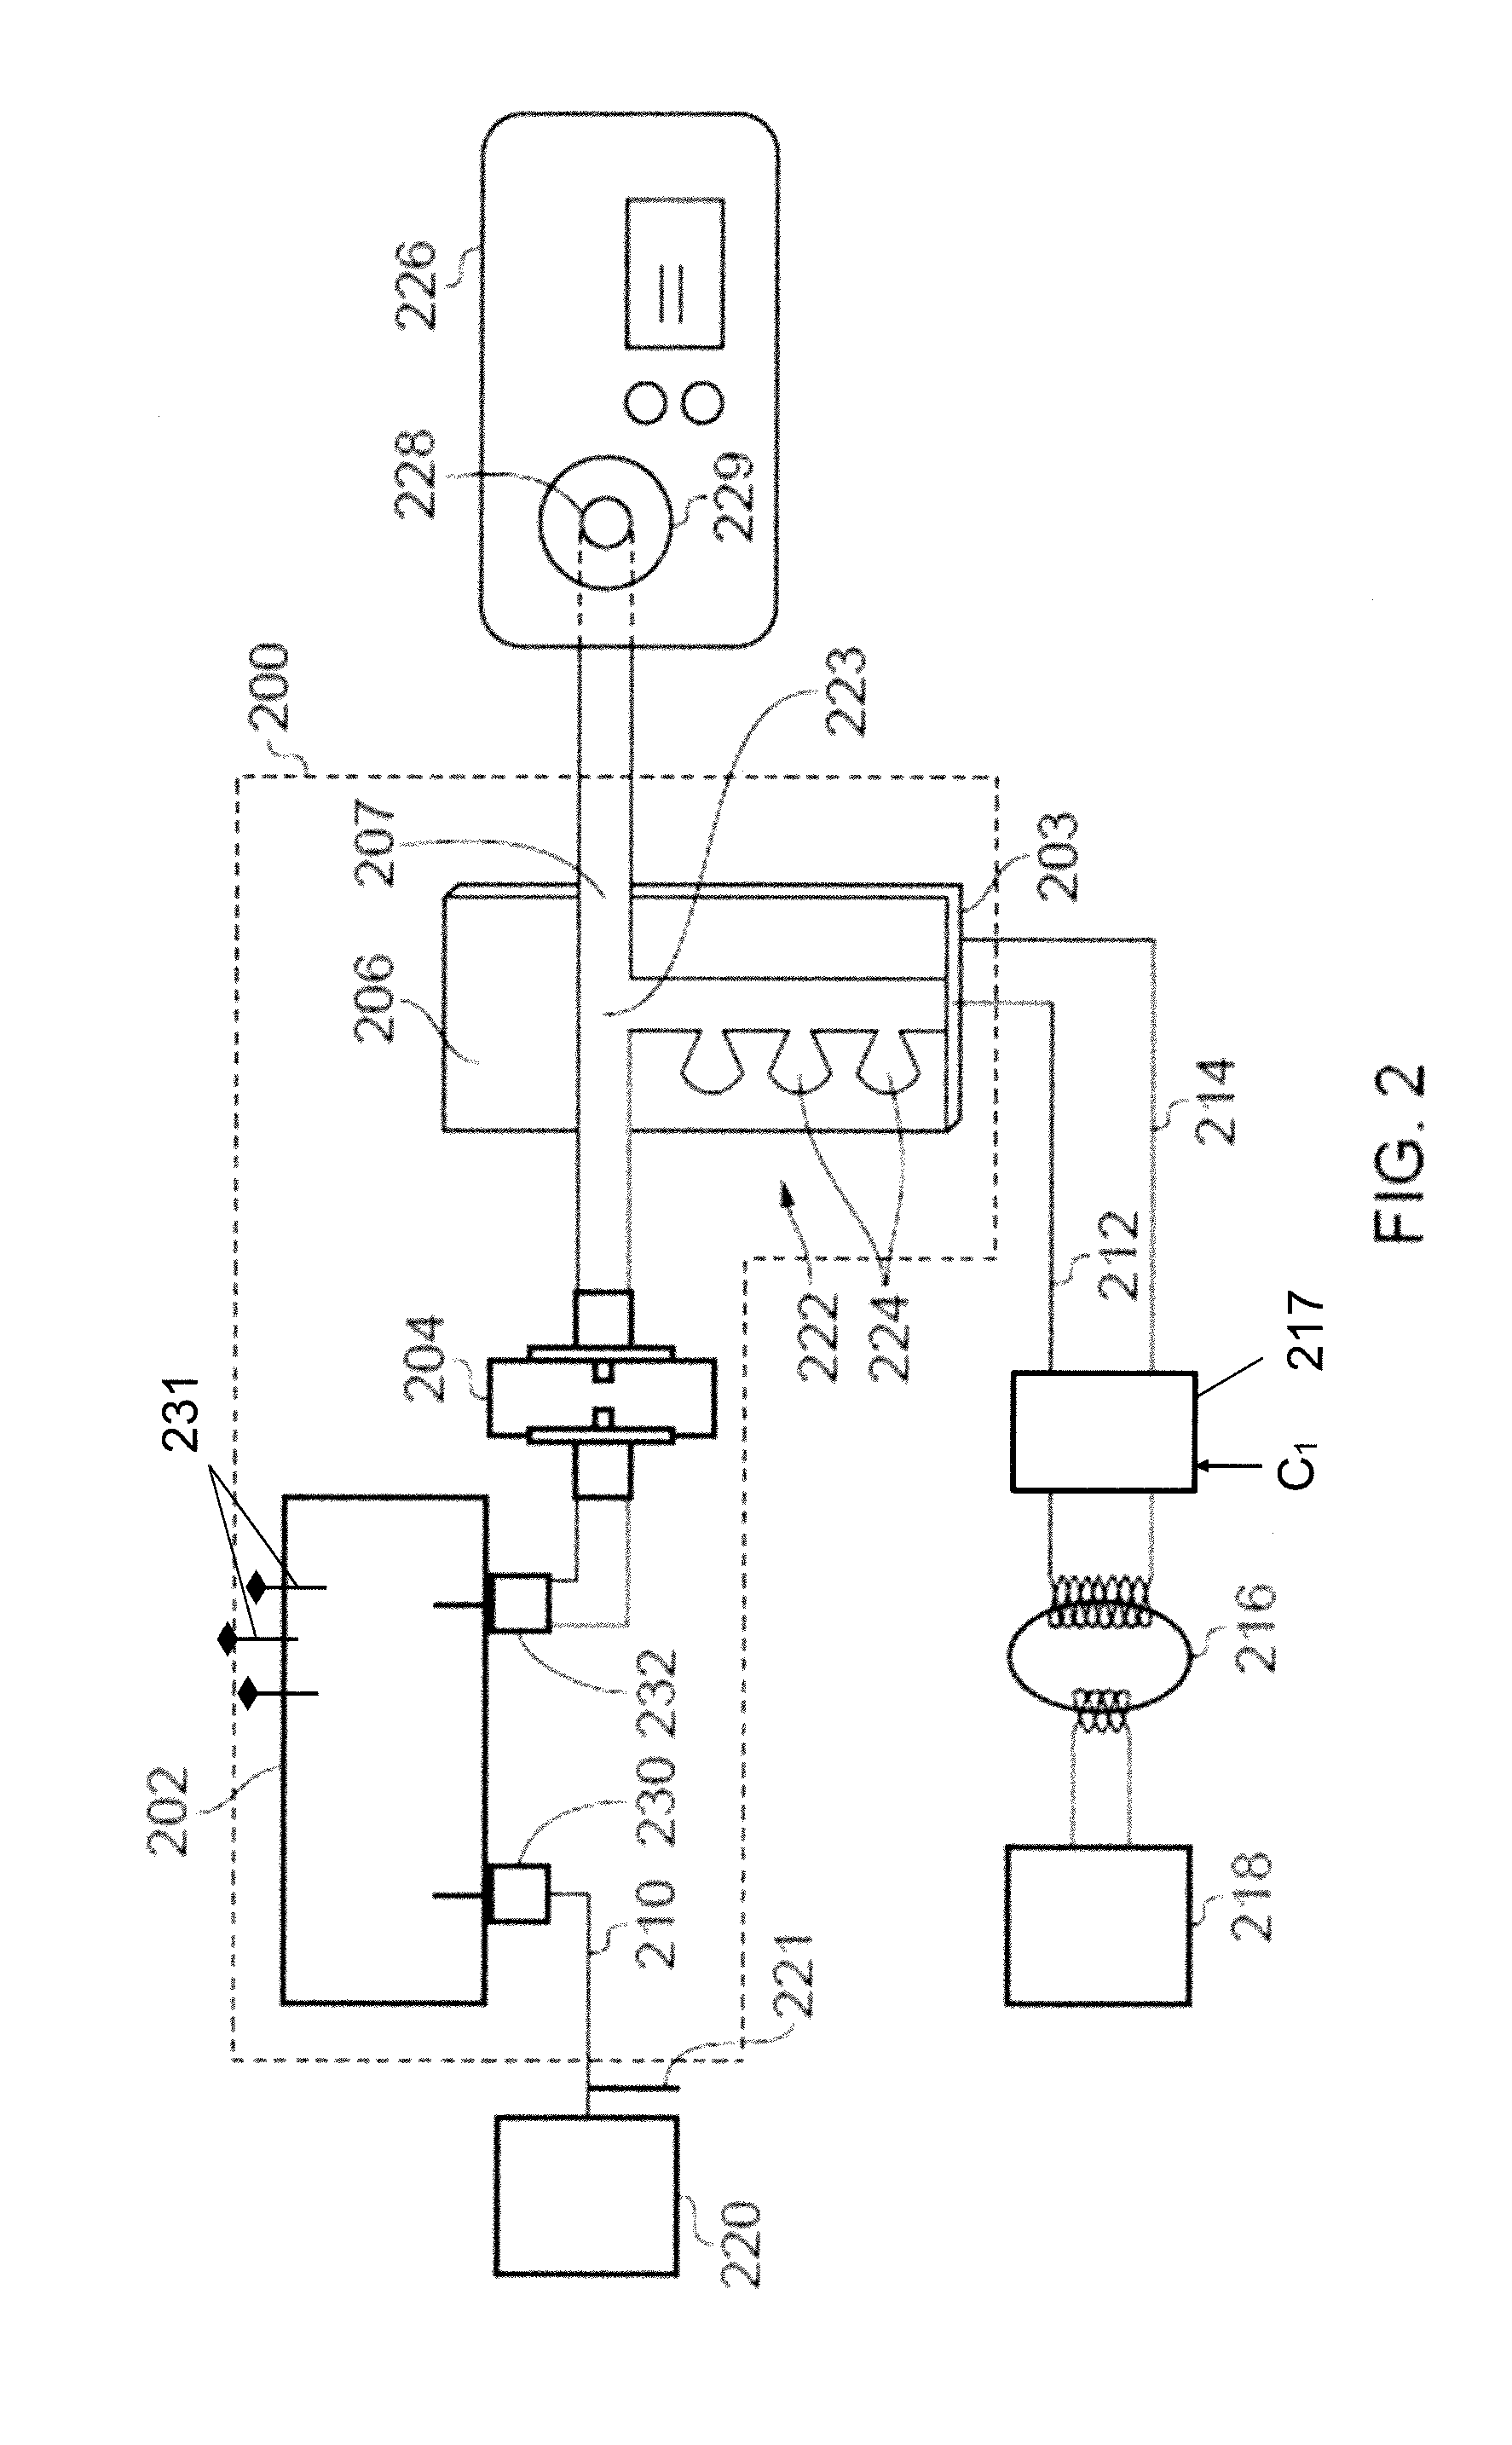 Electrosurgical apparatus for generating radiofrequency energy and microwave energy for delivery into biological tissue